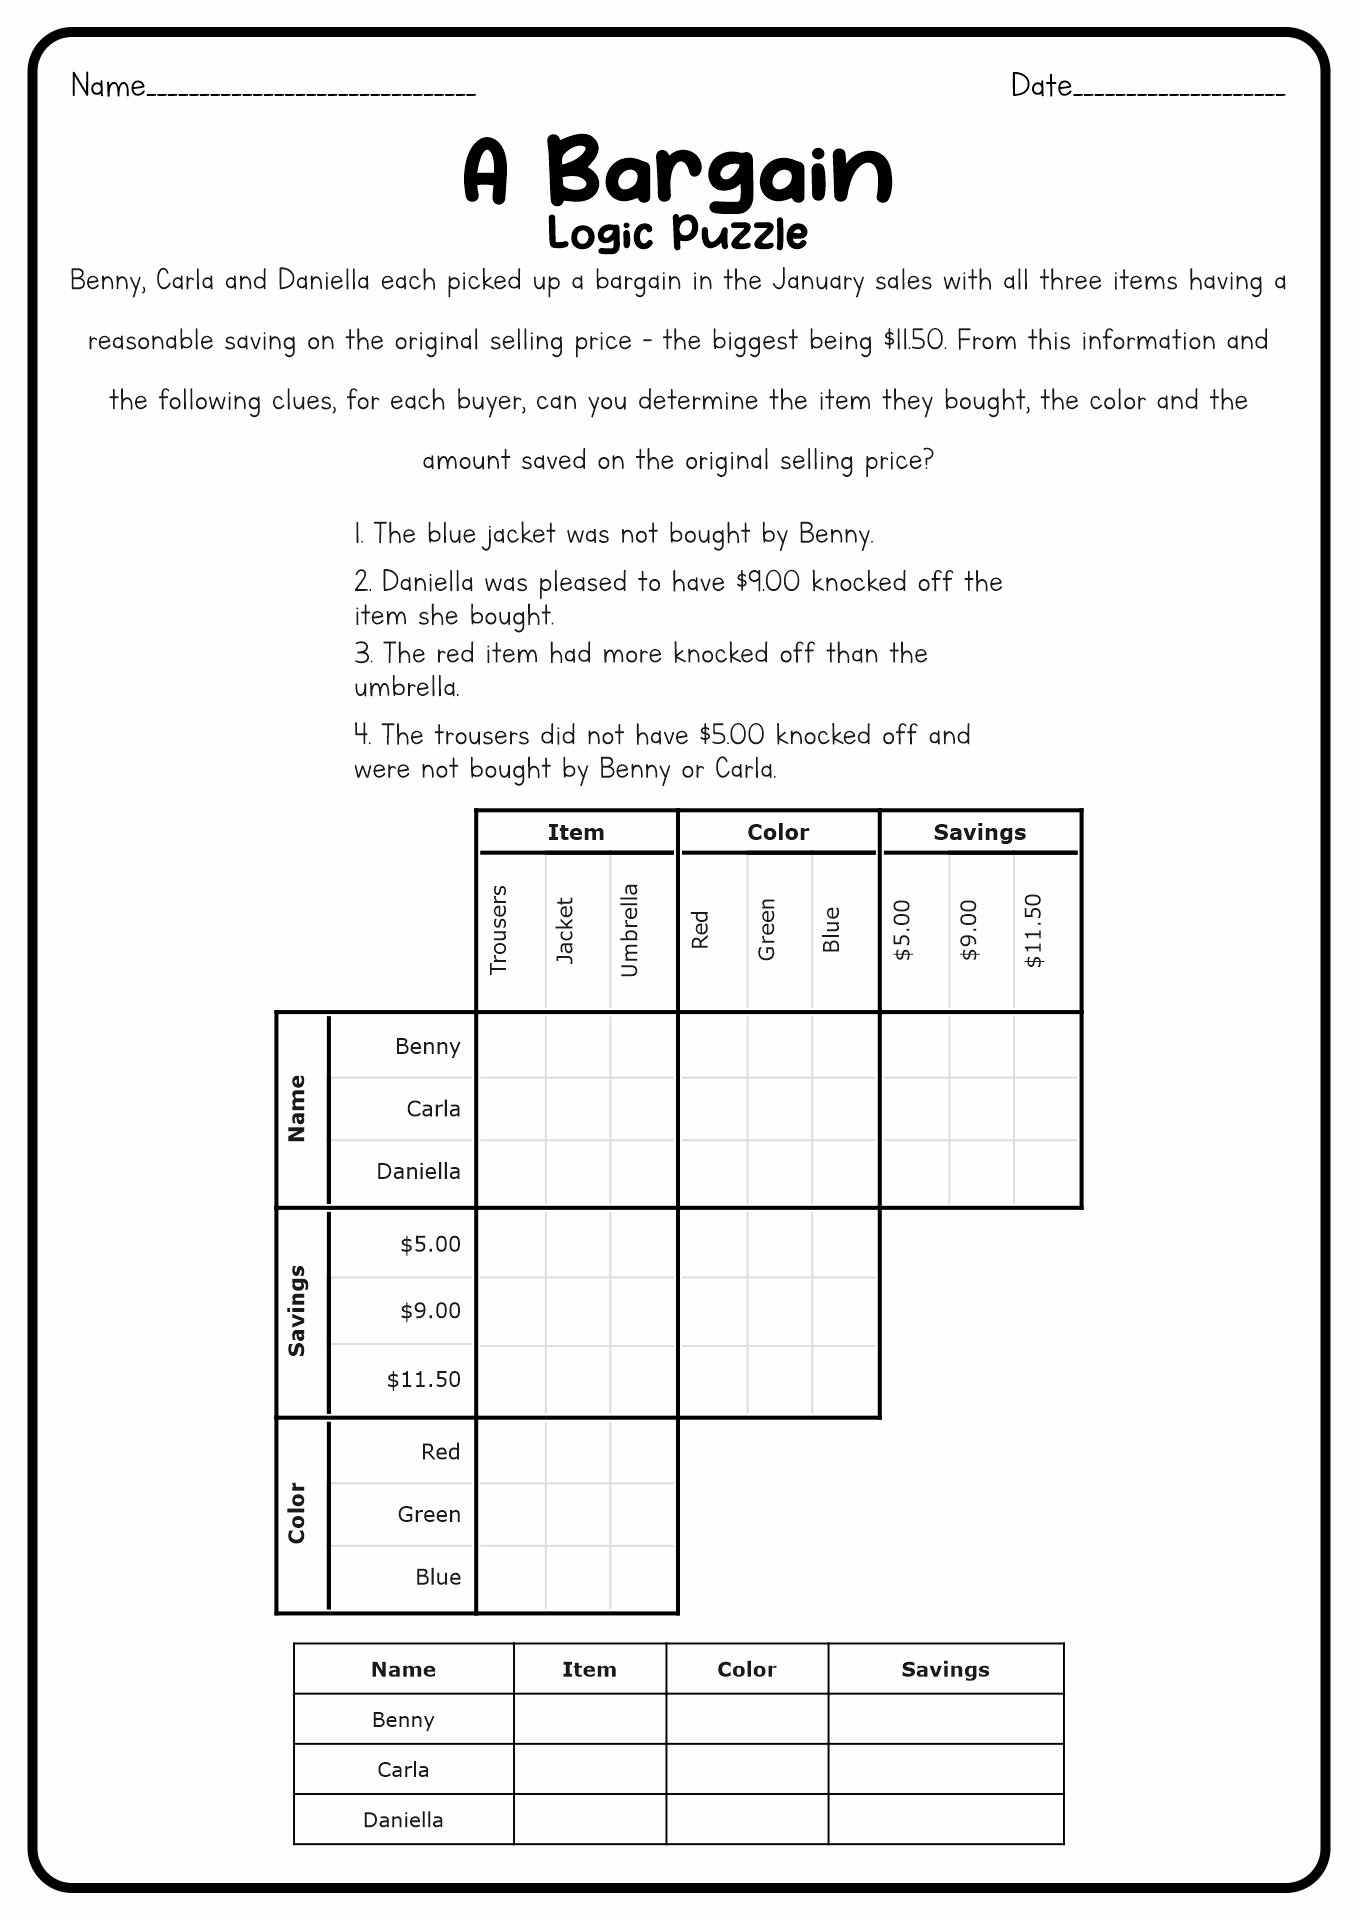 12-best-images-of-printable-logic-puzzle-worksheets-printable-logic-puzzle-worksheets-middle